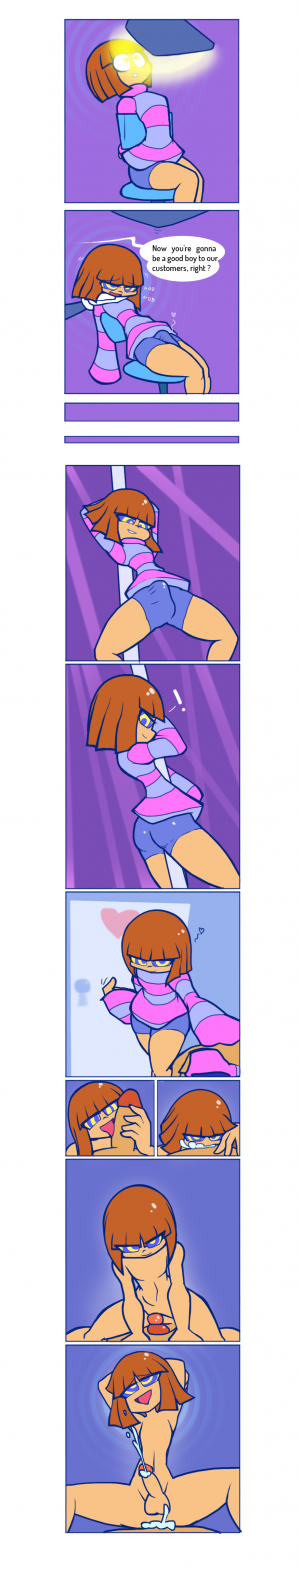 Frisk collection - evenytron - Page 11